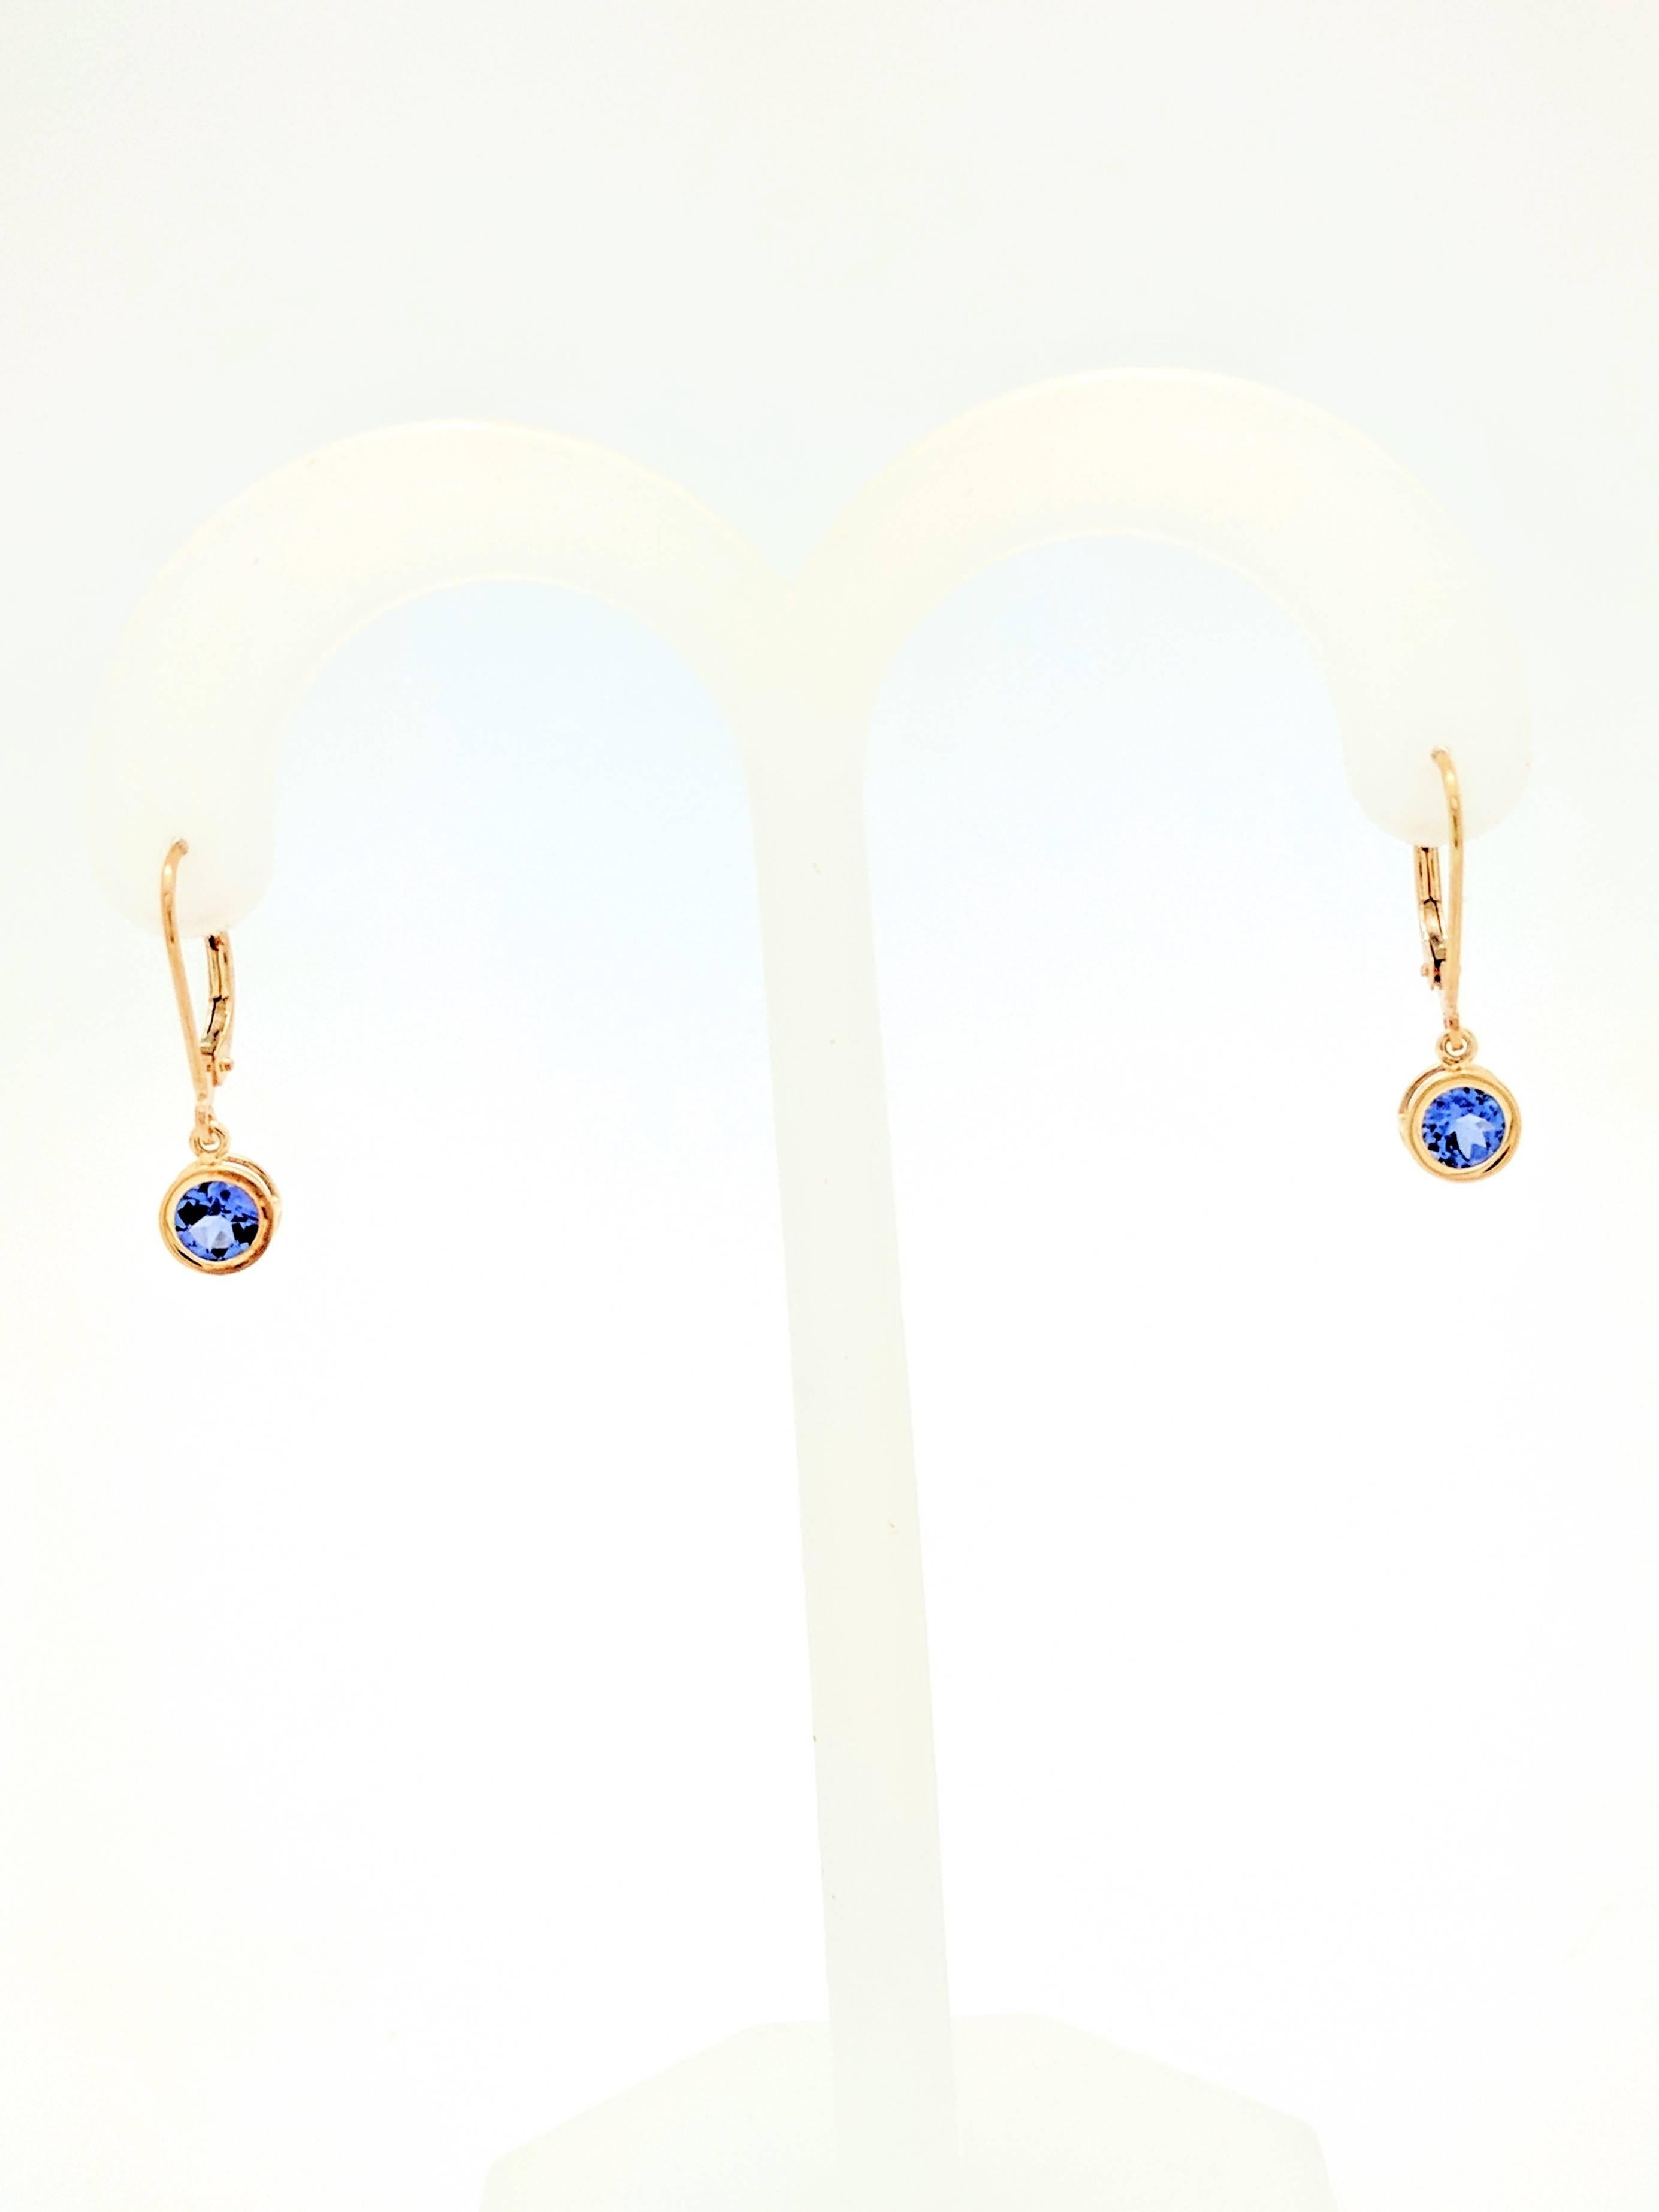 14K Yellow Gold .80ctw Round Bezel Set Tanzanite Dangle Earrings

You are viewing a beautiful pair of bezel set tanzanite dangle earrings. These earrings are crafted from 14k yellow gold and weighs 1.3 grams. Each earring features (1) .40ct round